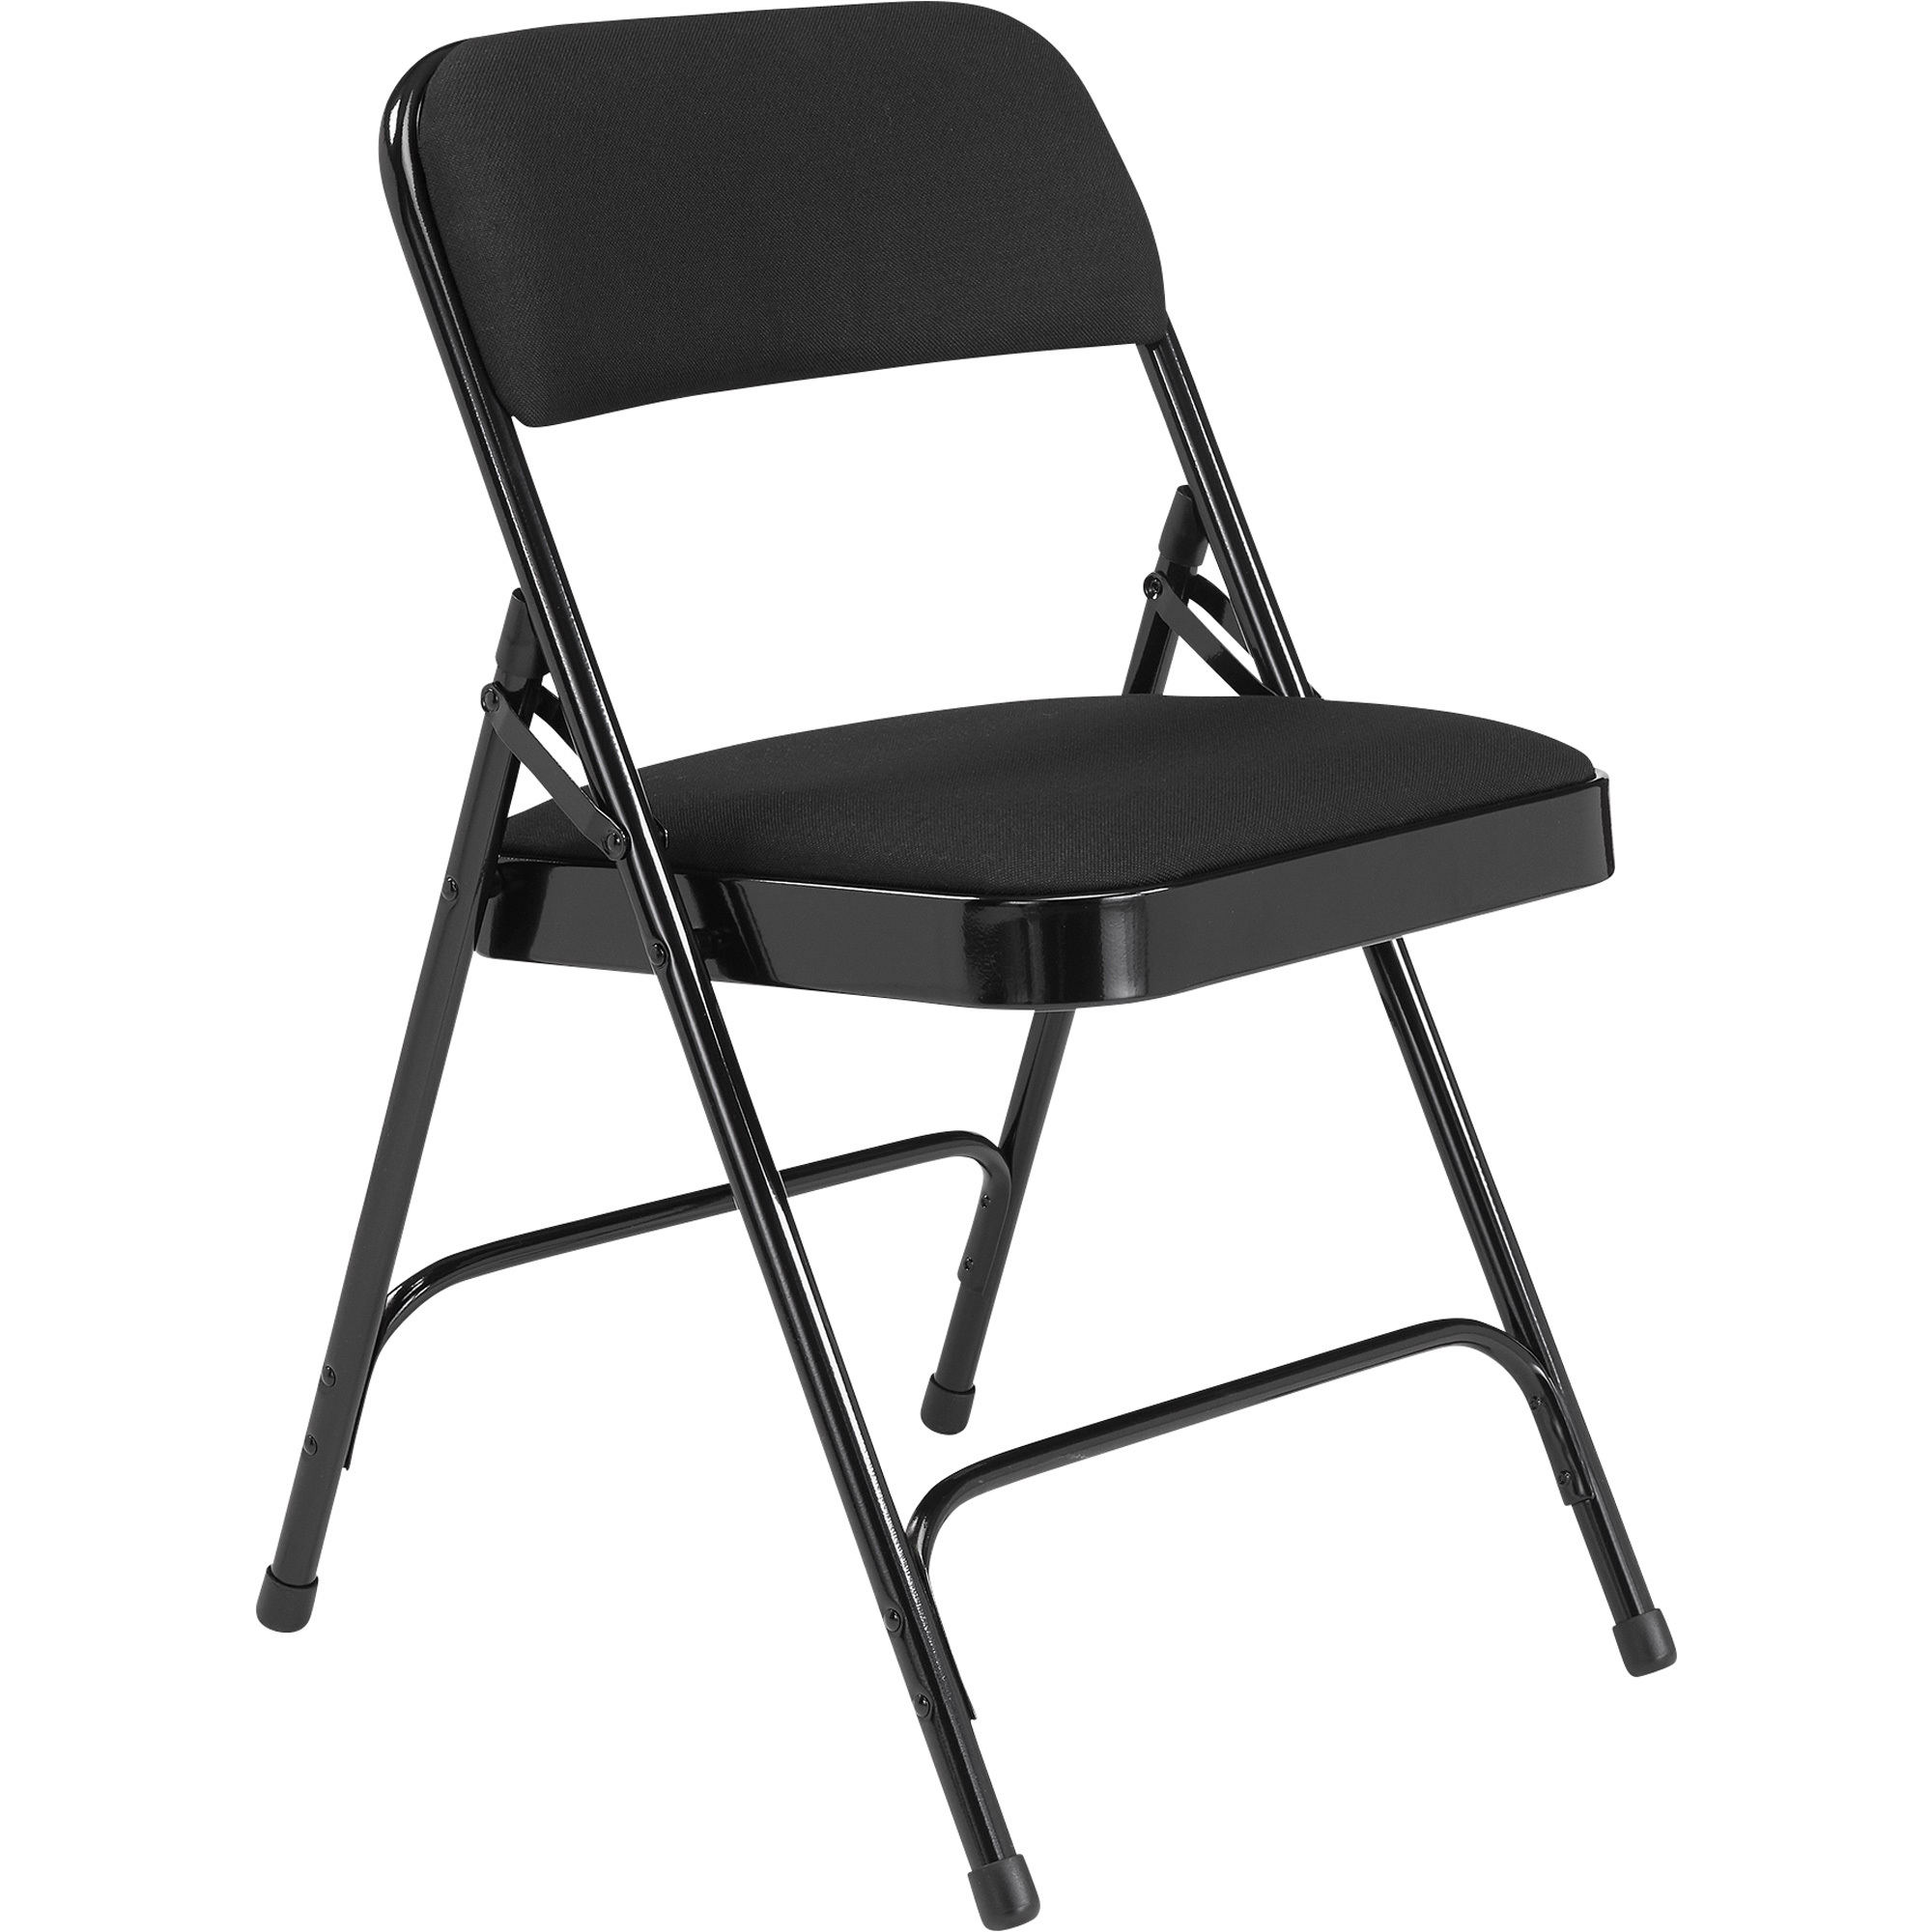 Steel Folding Chairs with Fabric Padded Seat and Back — Set of 4, Black/Black, Model - National Public Seating 2210